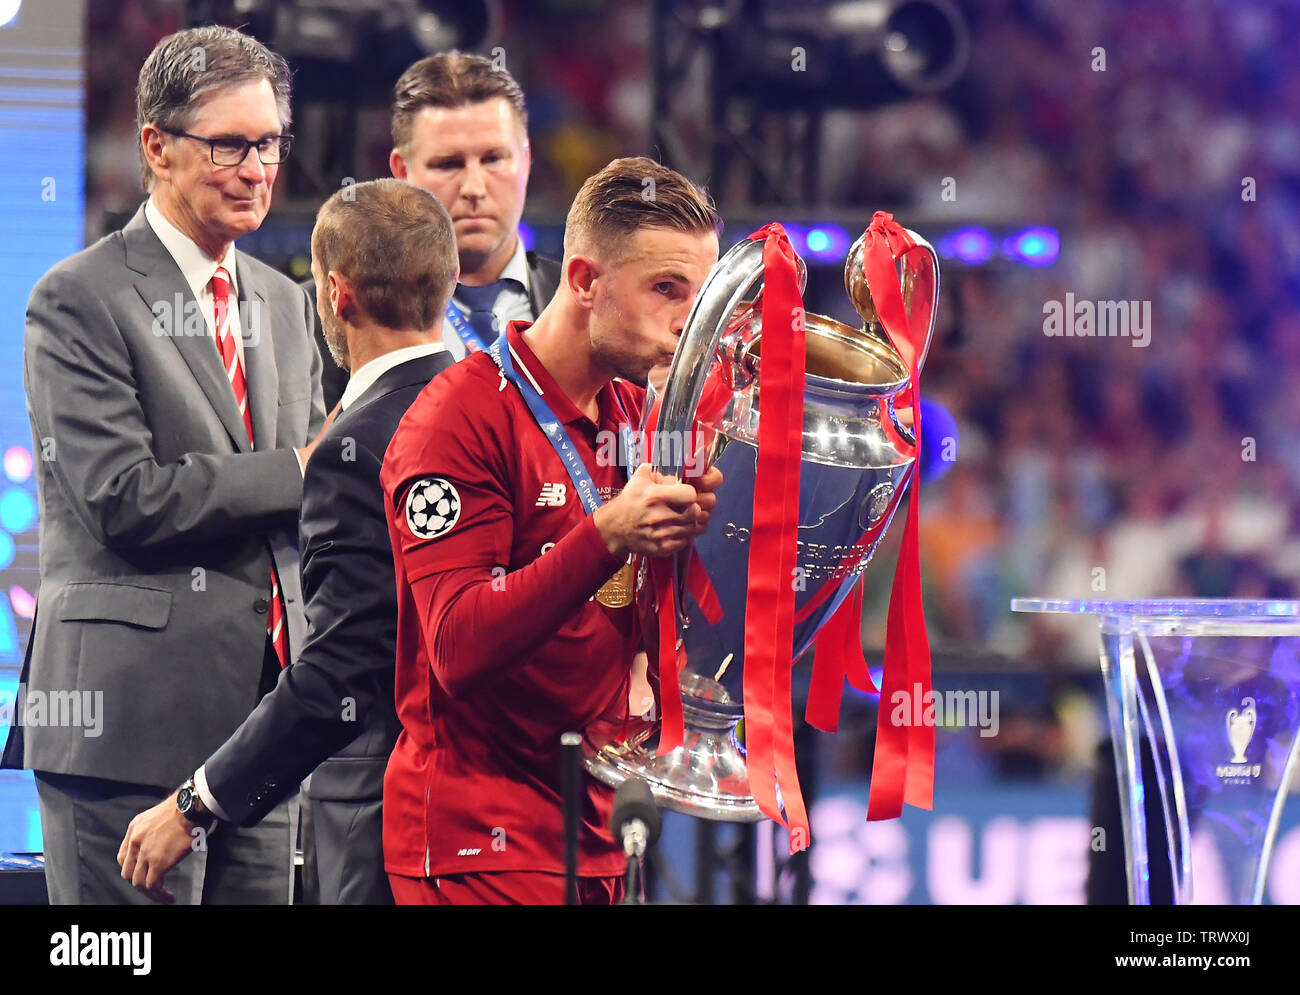 MADRID, SPAIN - JUNE 1, 2019: Jordan Henderson of Liverpool pictured during the award ceremony held after the 2018/19 UEFA Champions League Final between Tottenham Hotspur (England) and Liverpool FC (England) at Wanda Metropolitano. Stock Photo